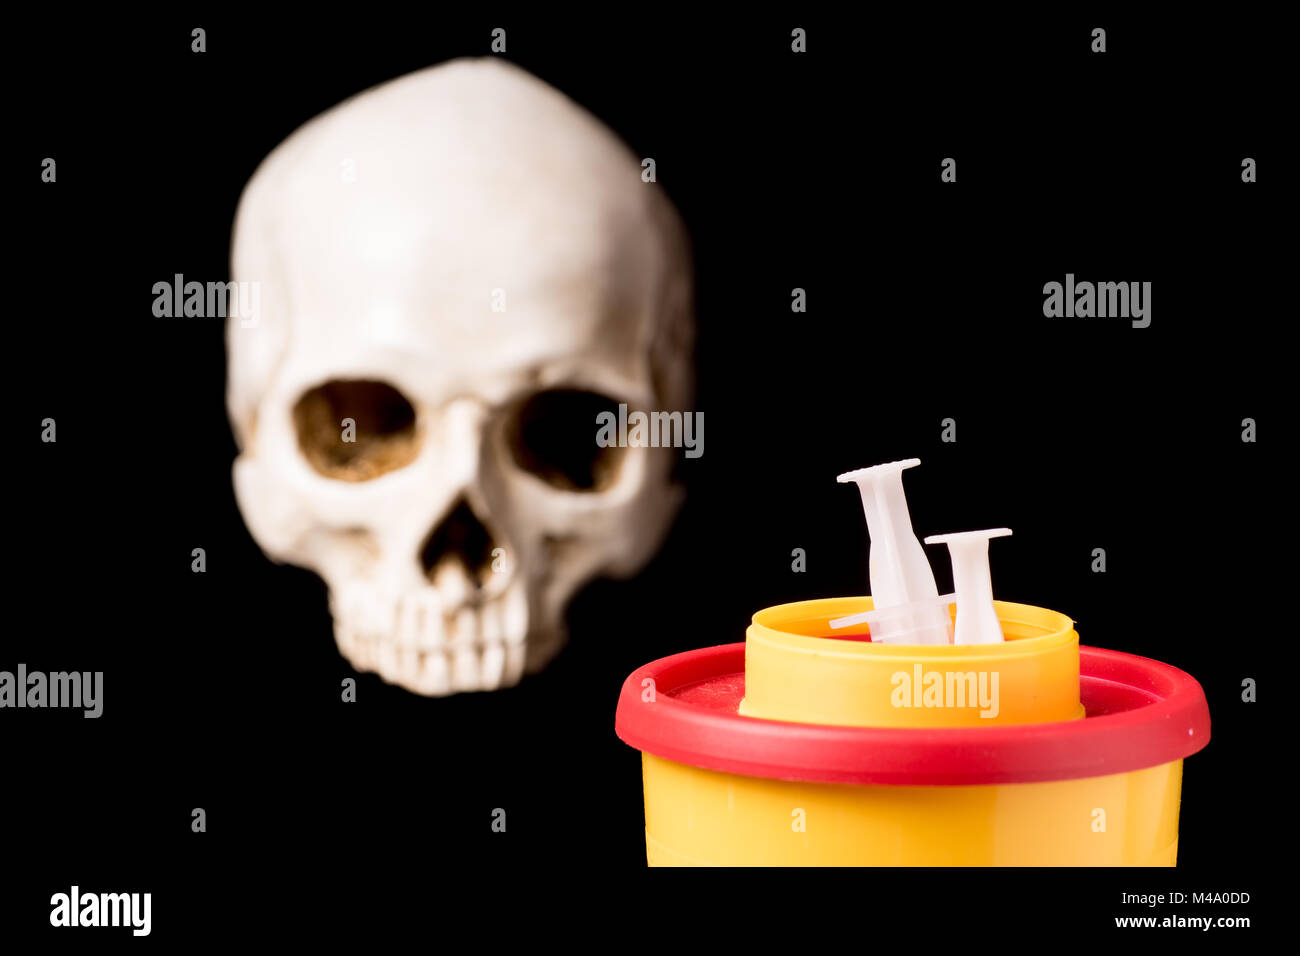 Medical waste container with syring and skull isolated on black background Stock Photo